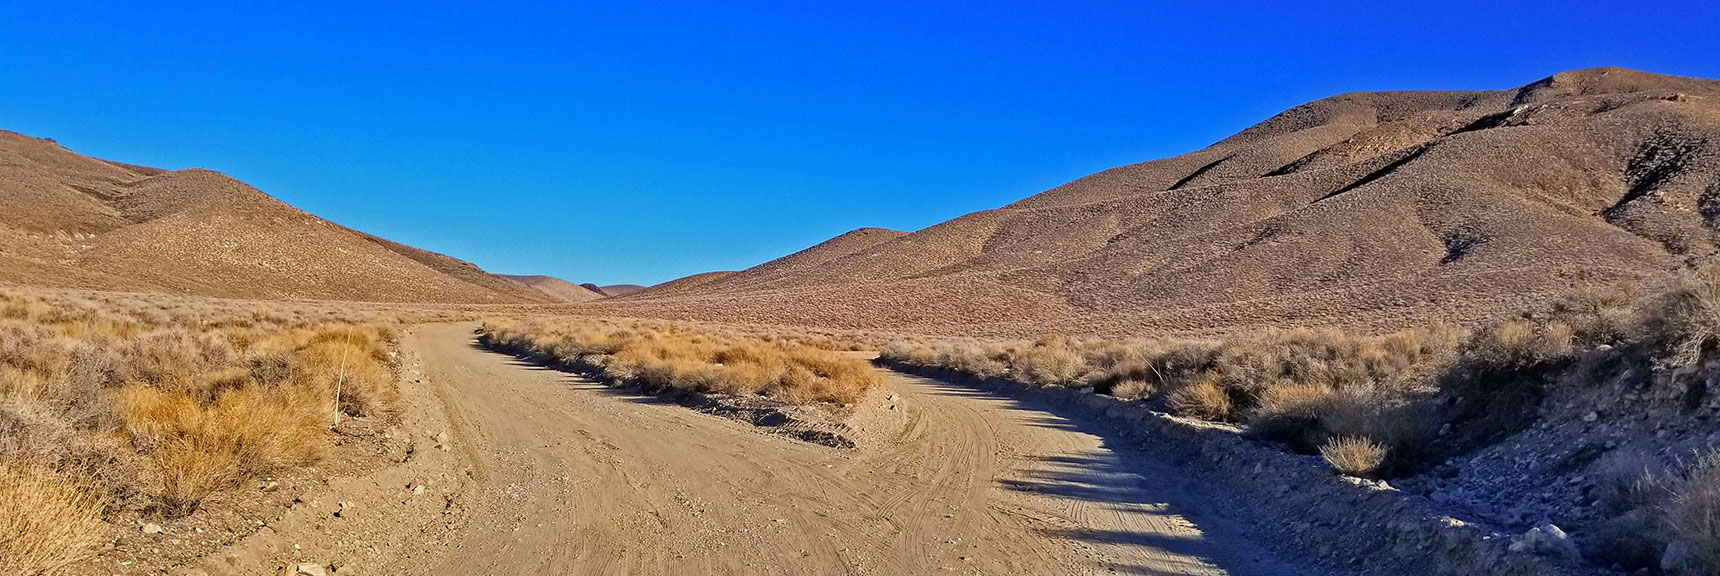 Aguereberry Point Road to the Left, Harrisburg and Eureka Mine to the Right | Aguereberry Point | Panamint Mountain Range | Death Valley National Park, California